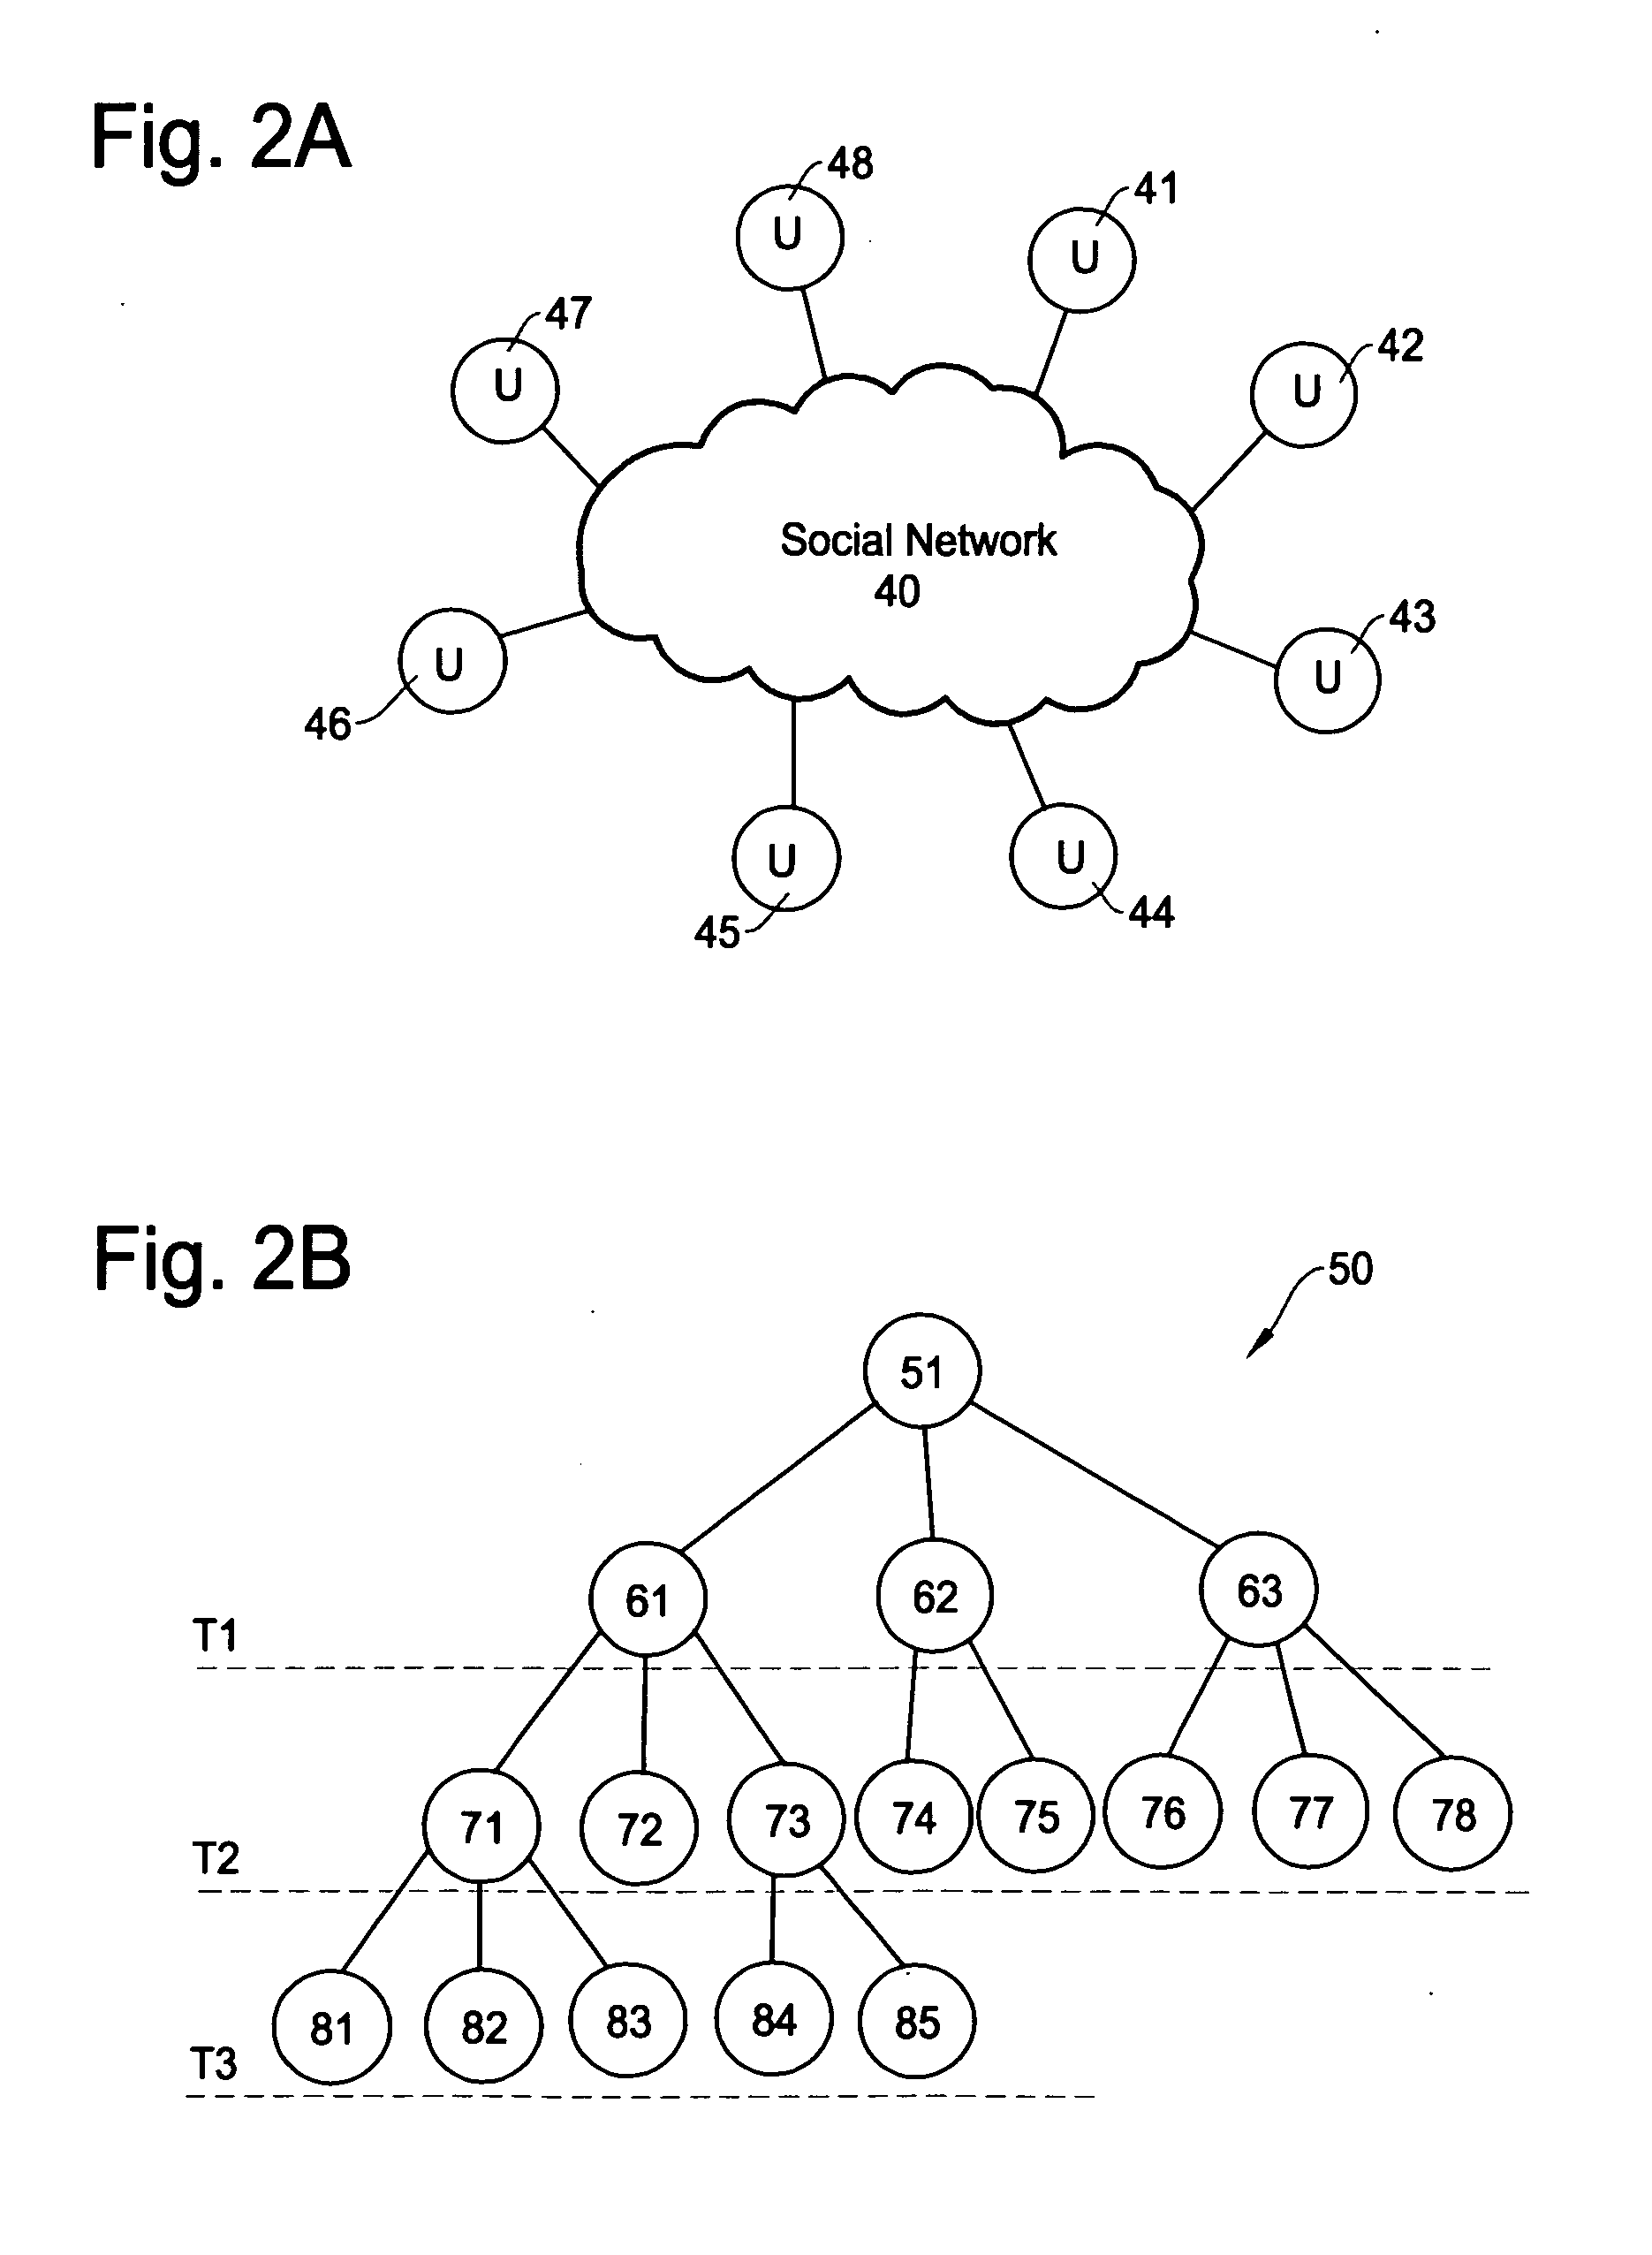 Method and apparatus for enhancing search results by extending search to contacts of social networks